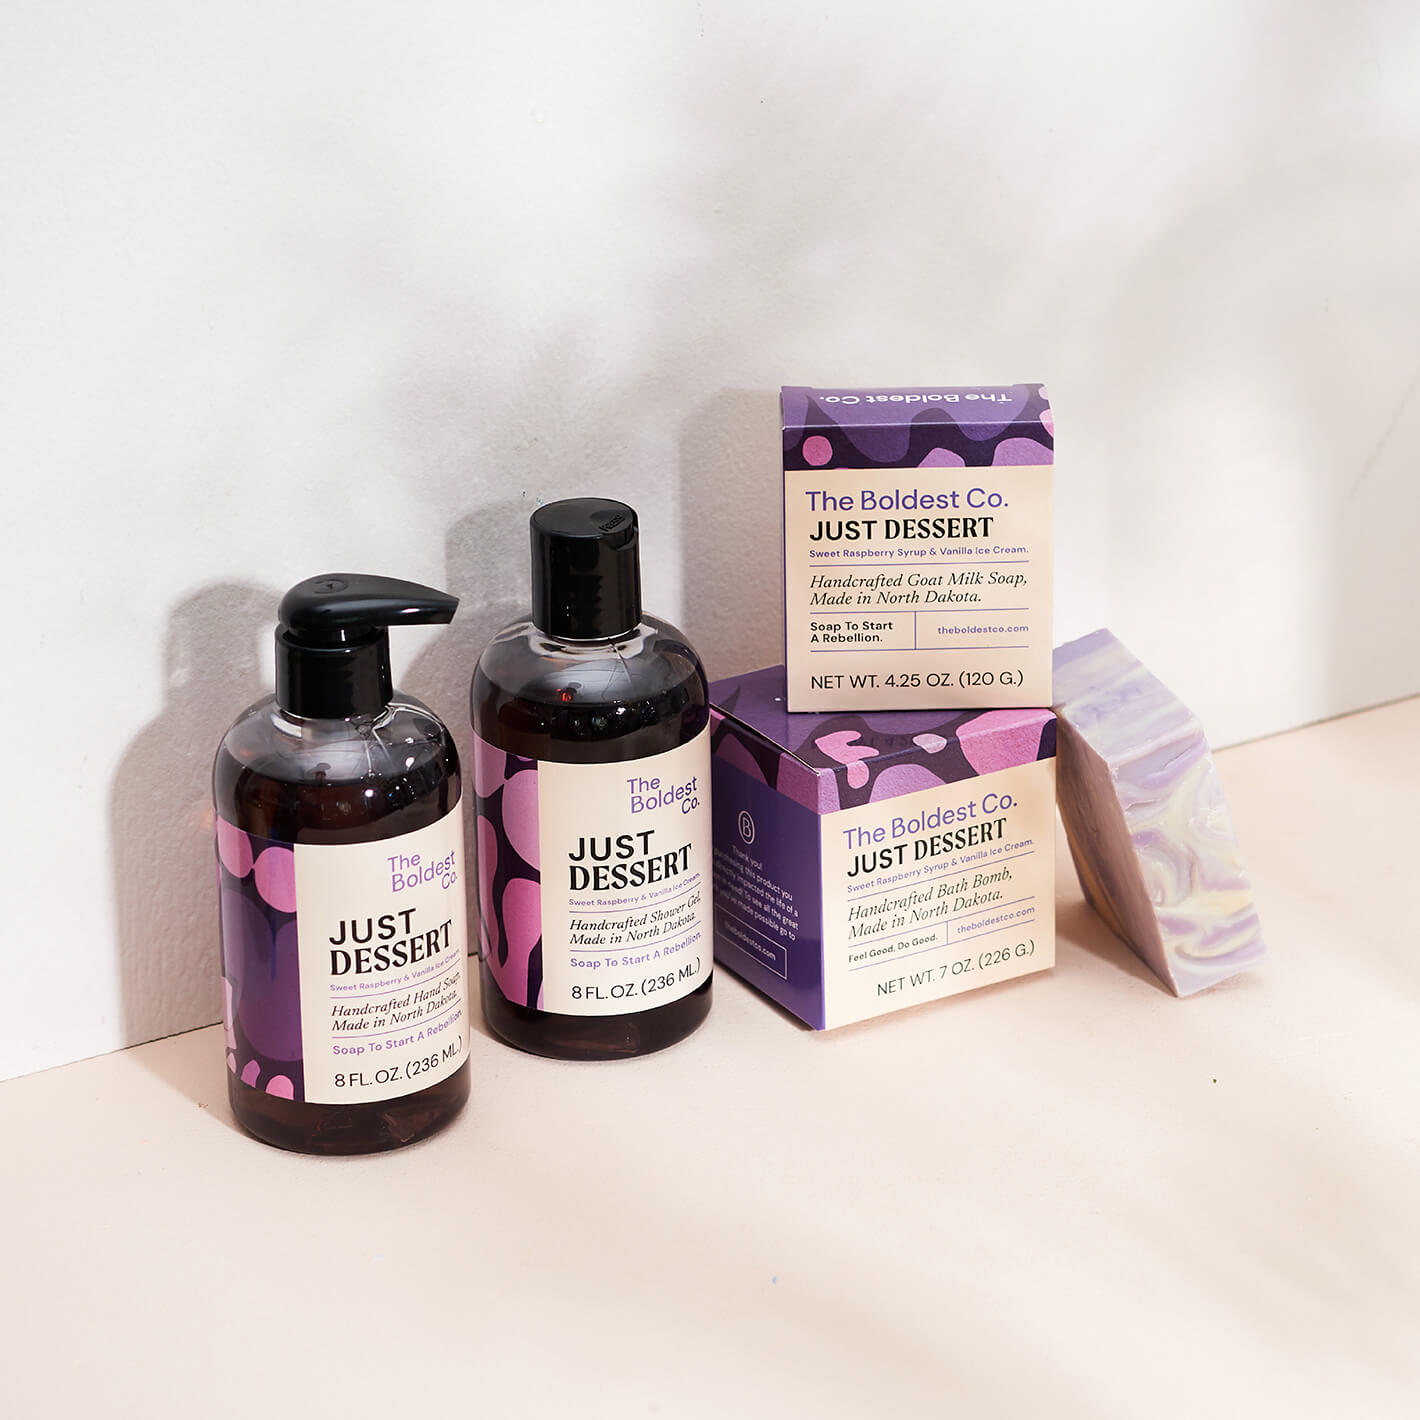 Brand identity case study image of The Boldest co’s ‘Just Dessert’ scent range. A hand wash, shower gel, soap box and bath bomb box feature purple detailing and sit in a cream coloured background.